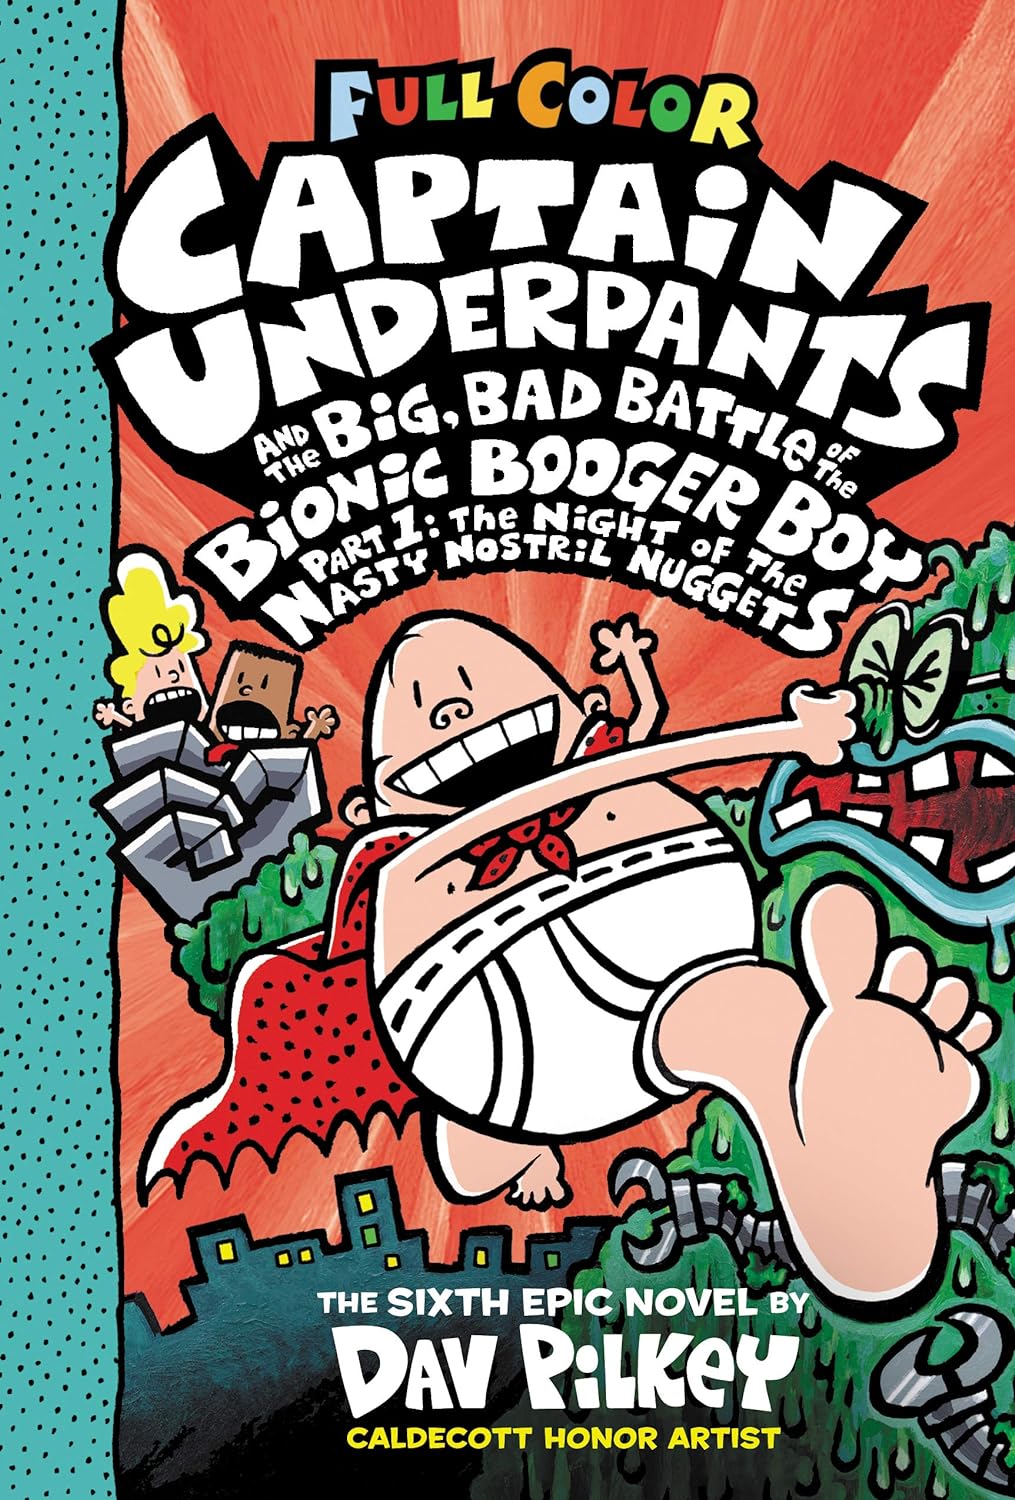 Captain Underpants and the Big, Bad Battle of the Bionic Booger Boy, Part 1: The Night of the Nasty Nostril Nuggets: Color Edition Hardcover – Illustrated, August 28, 2018